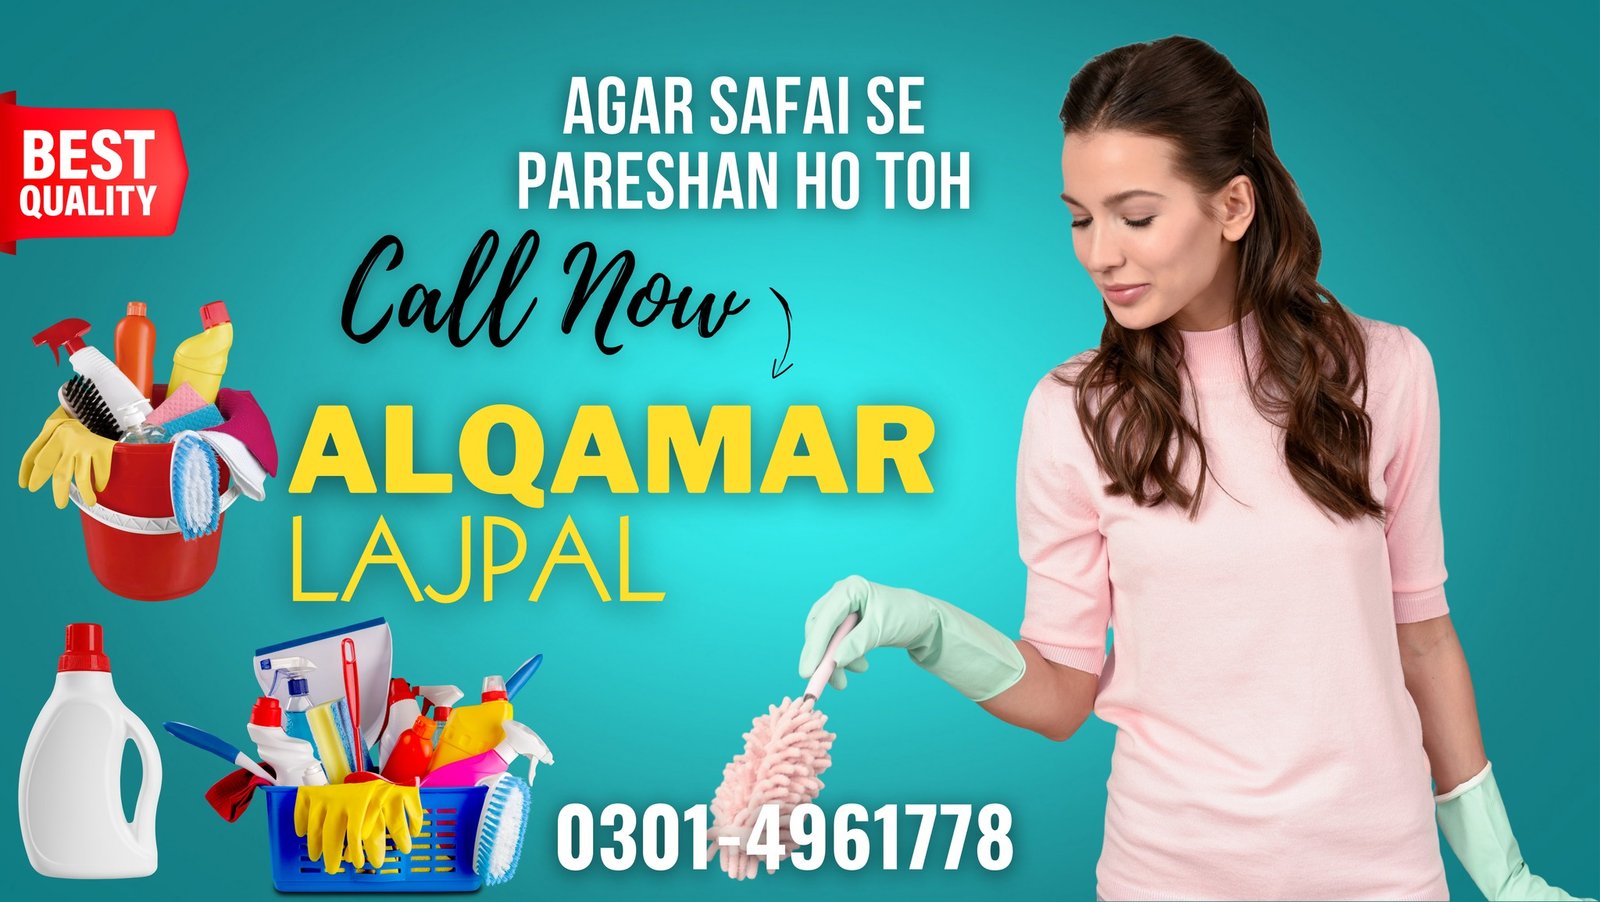 Epitome of Reliable Home Servant Provision in Islamabad